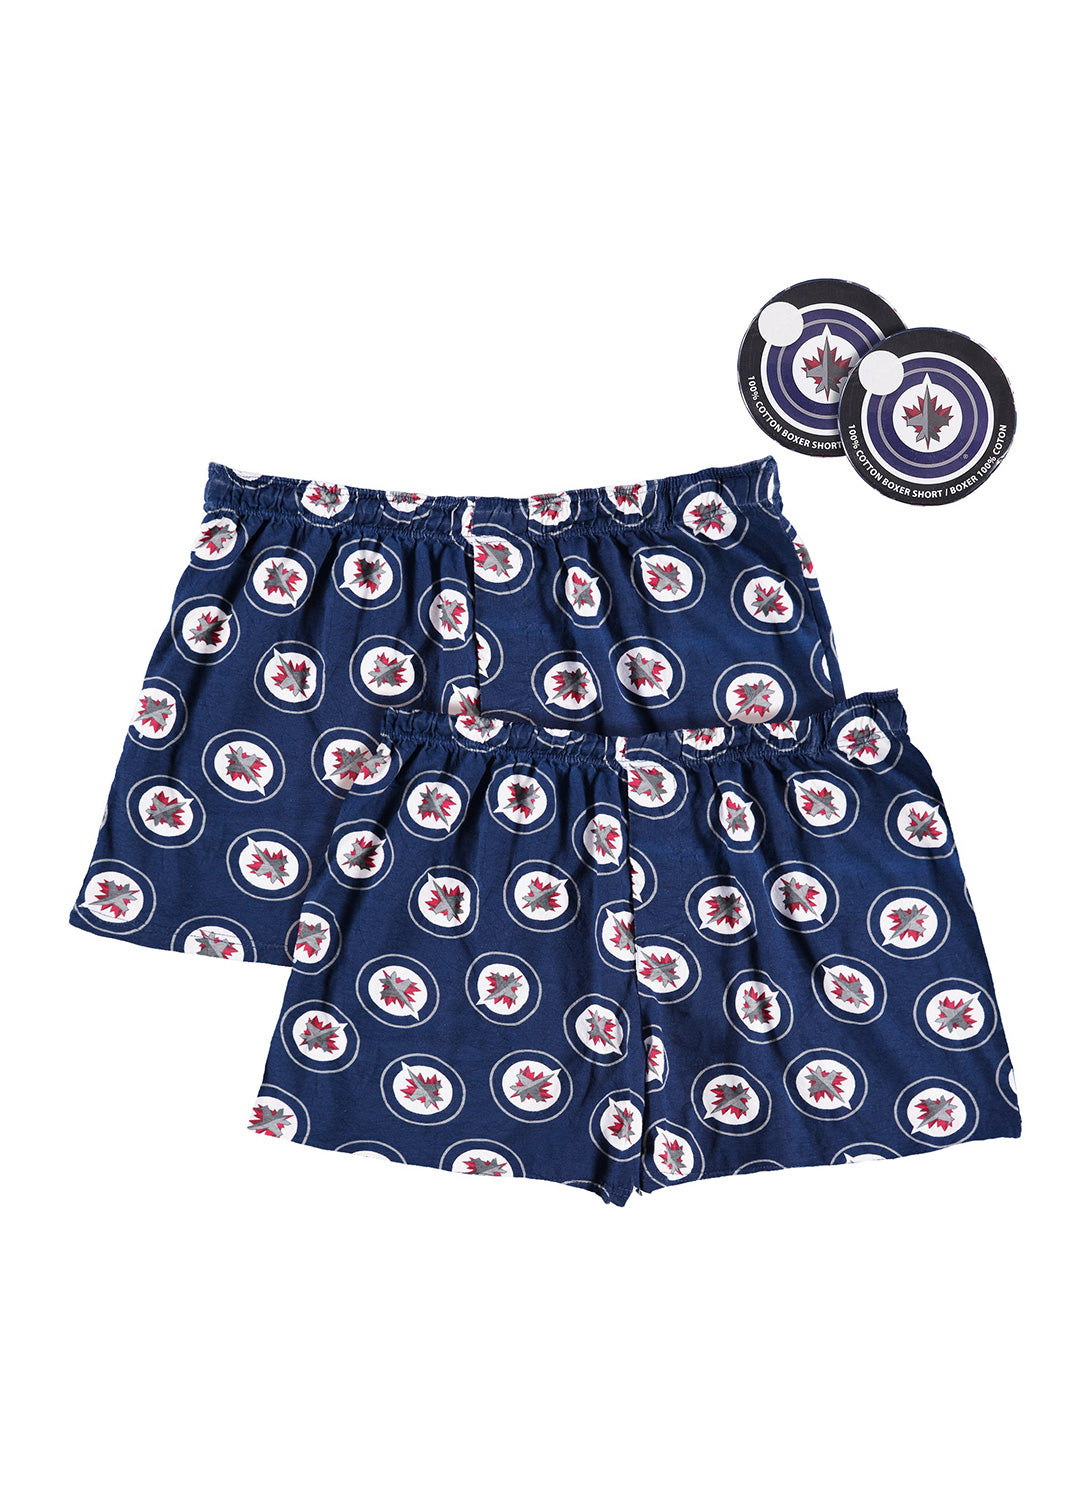 Pair of mens boxers with Winnipeg Jets print (blue)